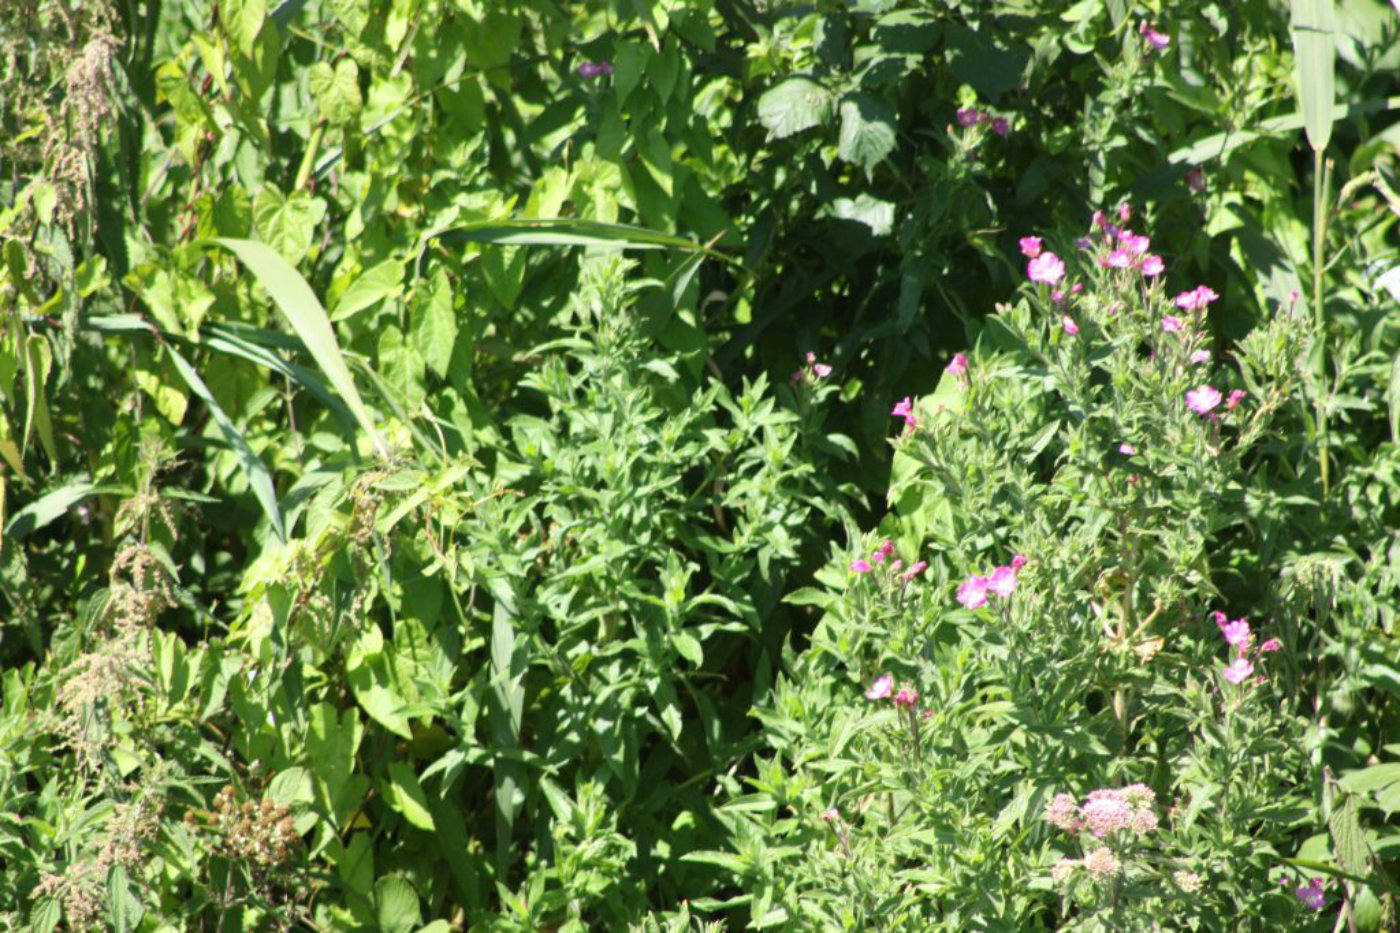 Greater willow herb